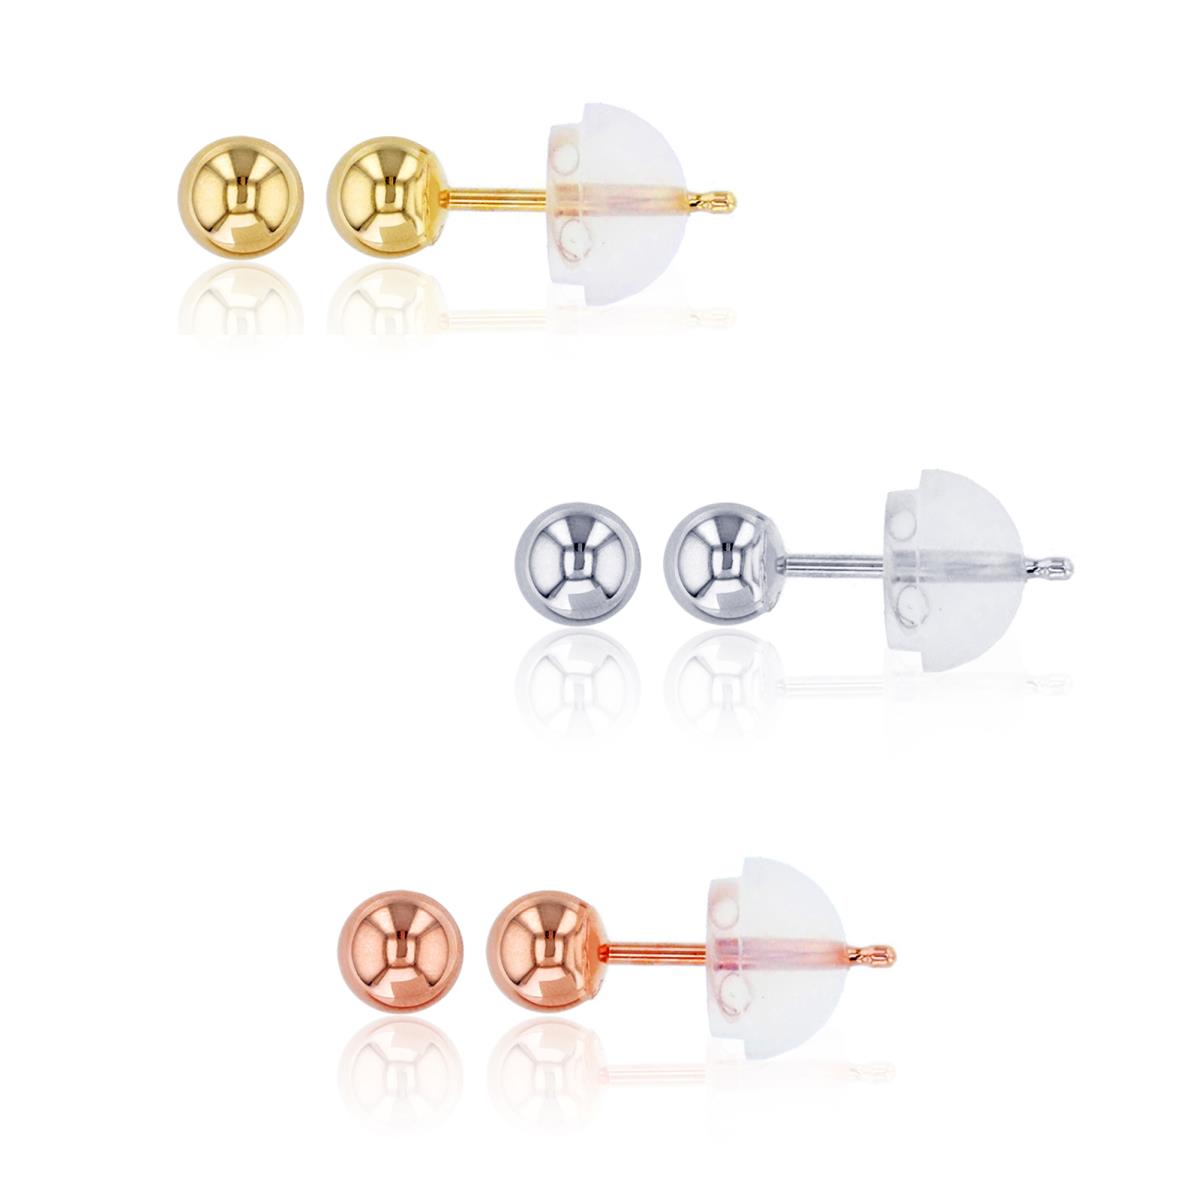 10K Tricolor 4MM YWR Ball Earring Stud Set with Silicone Backs